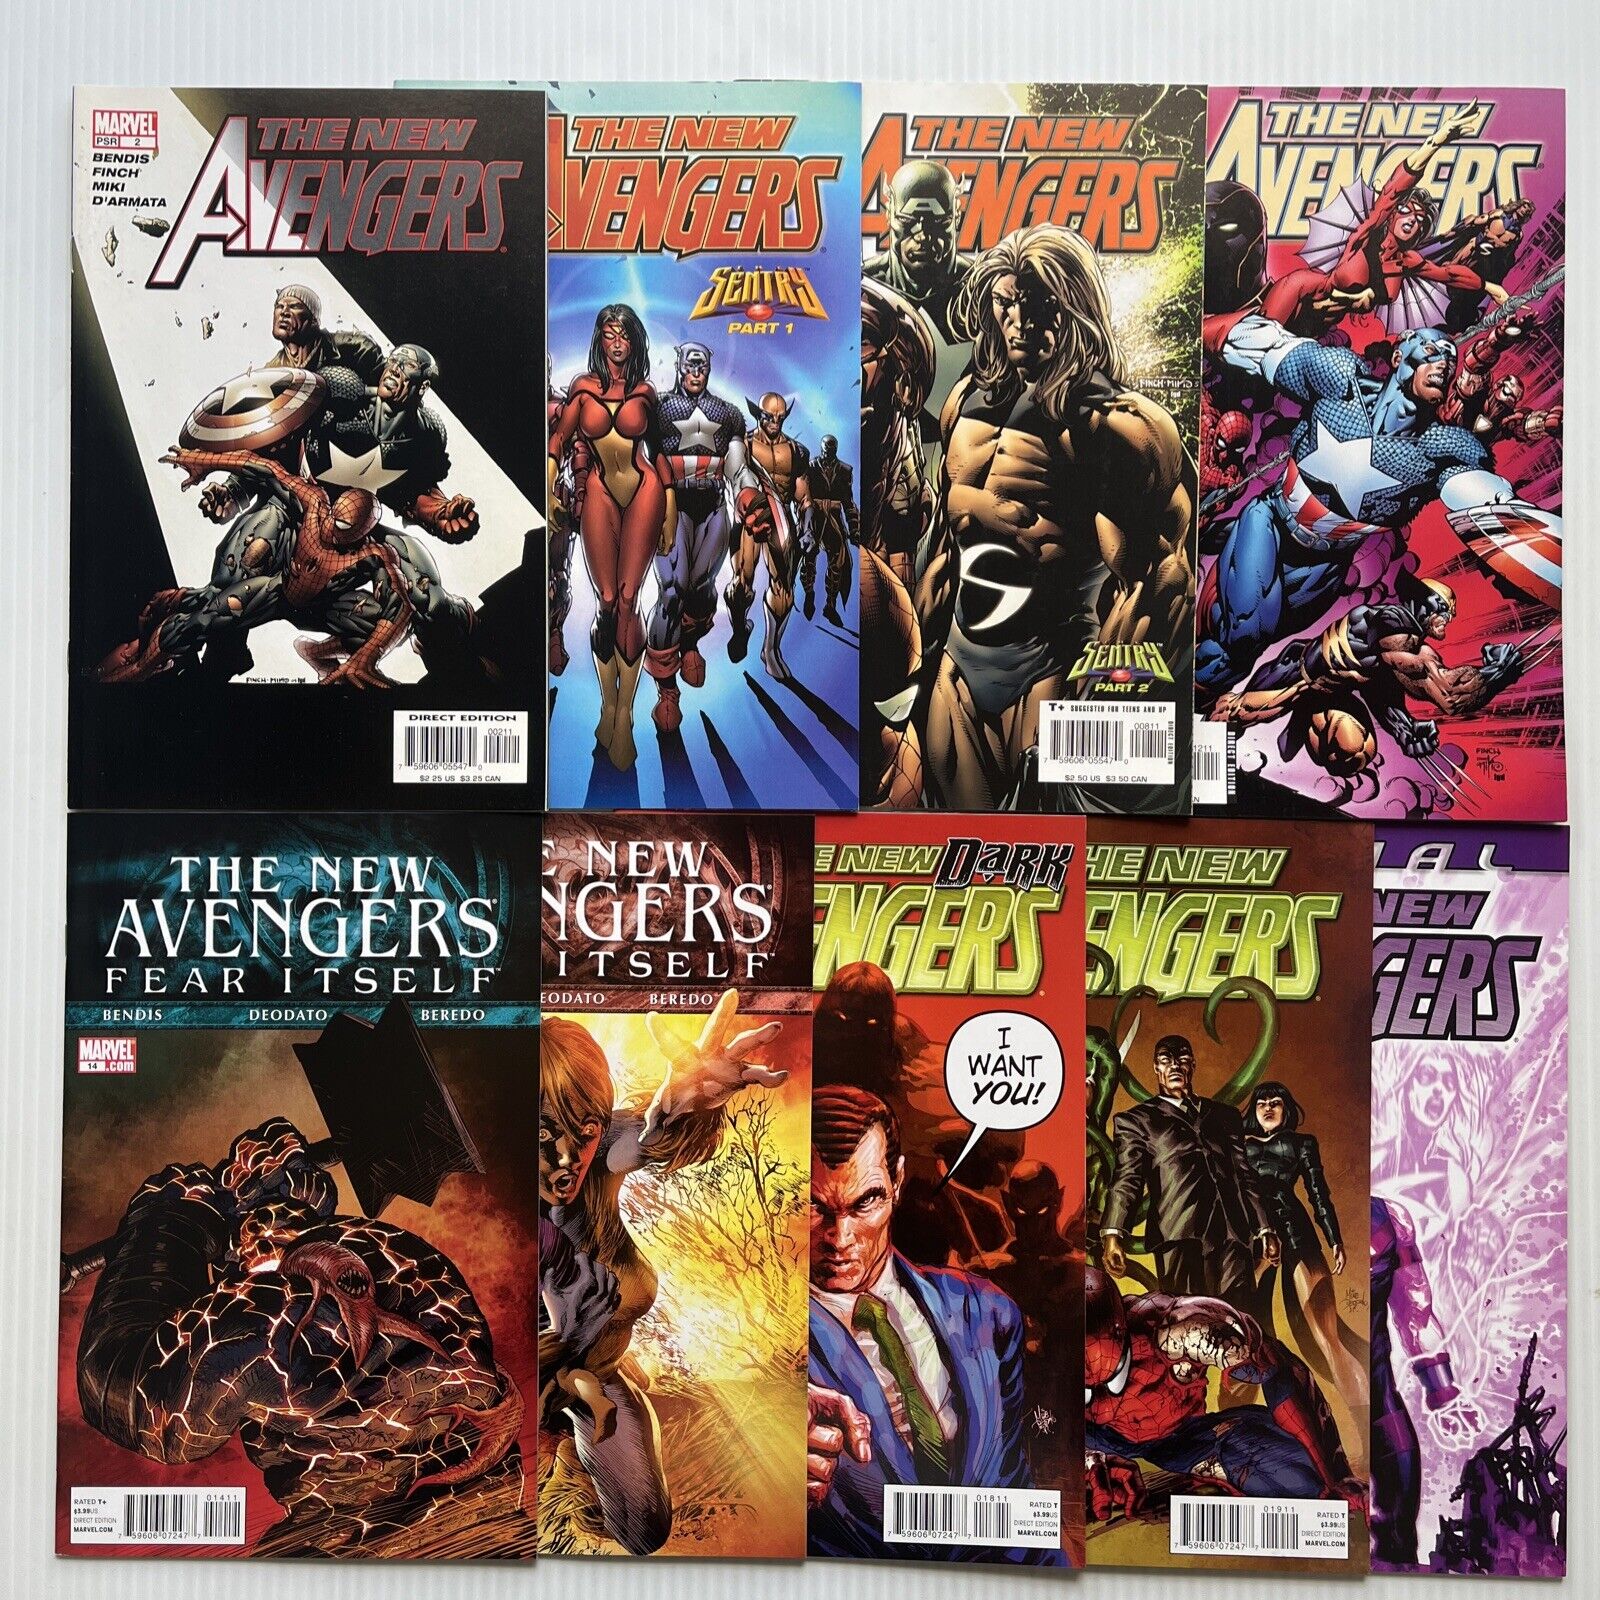 NEW AVENGERS Lot Of 9 Issues, Marvel (2005-‘12) 1st Ptg Mixed Grades